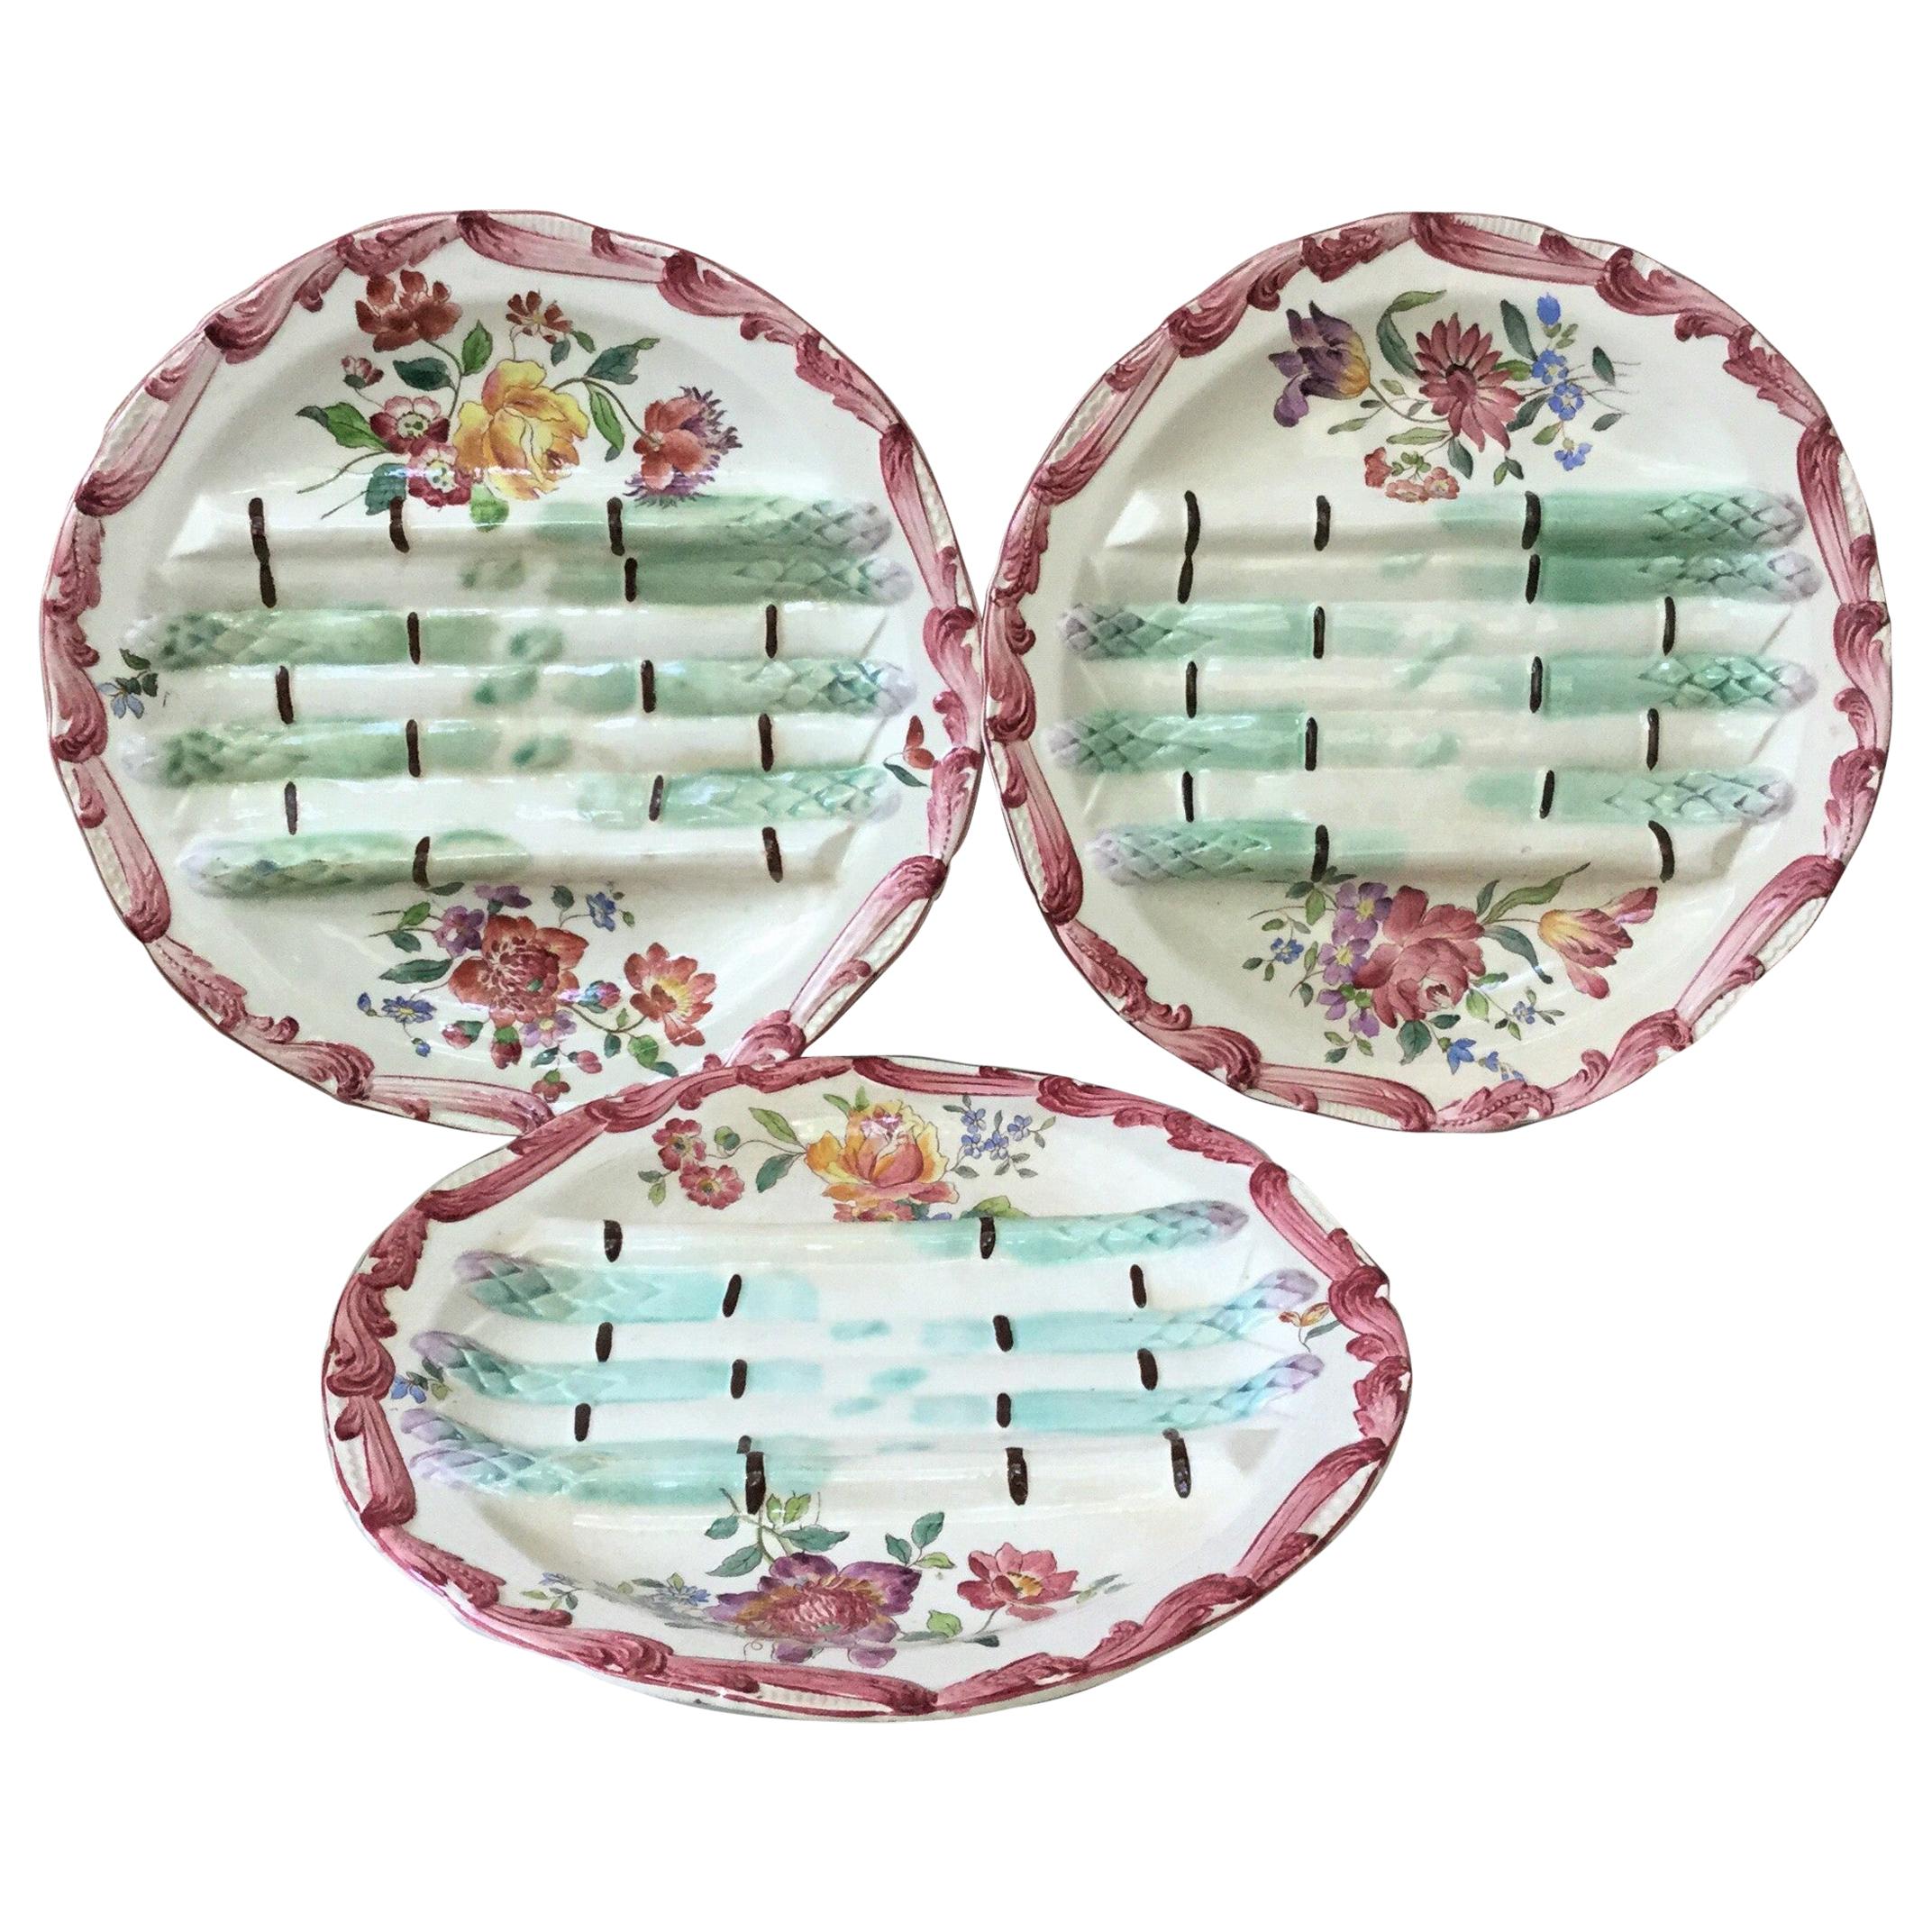 19th Century Majolica Asparagus Plate with Flowers Longchamp In Good Condition For Sale In Austin, TX